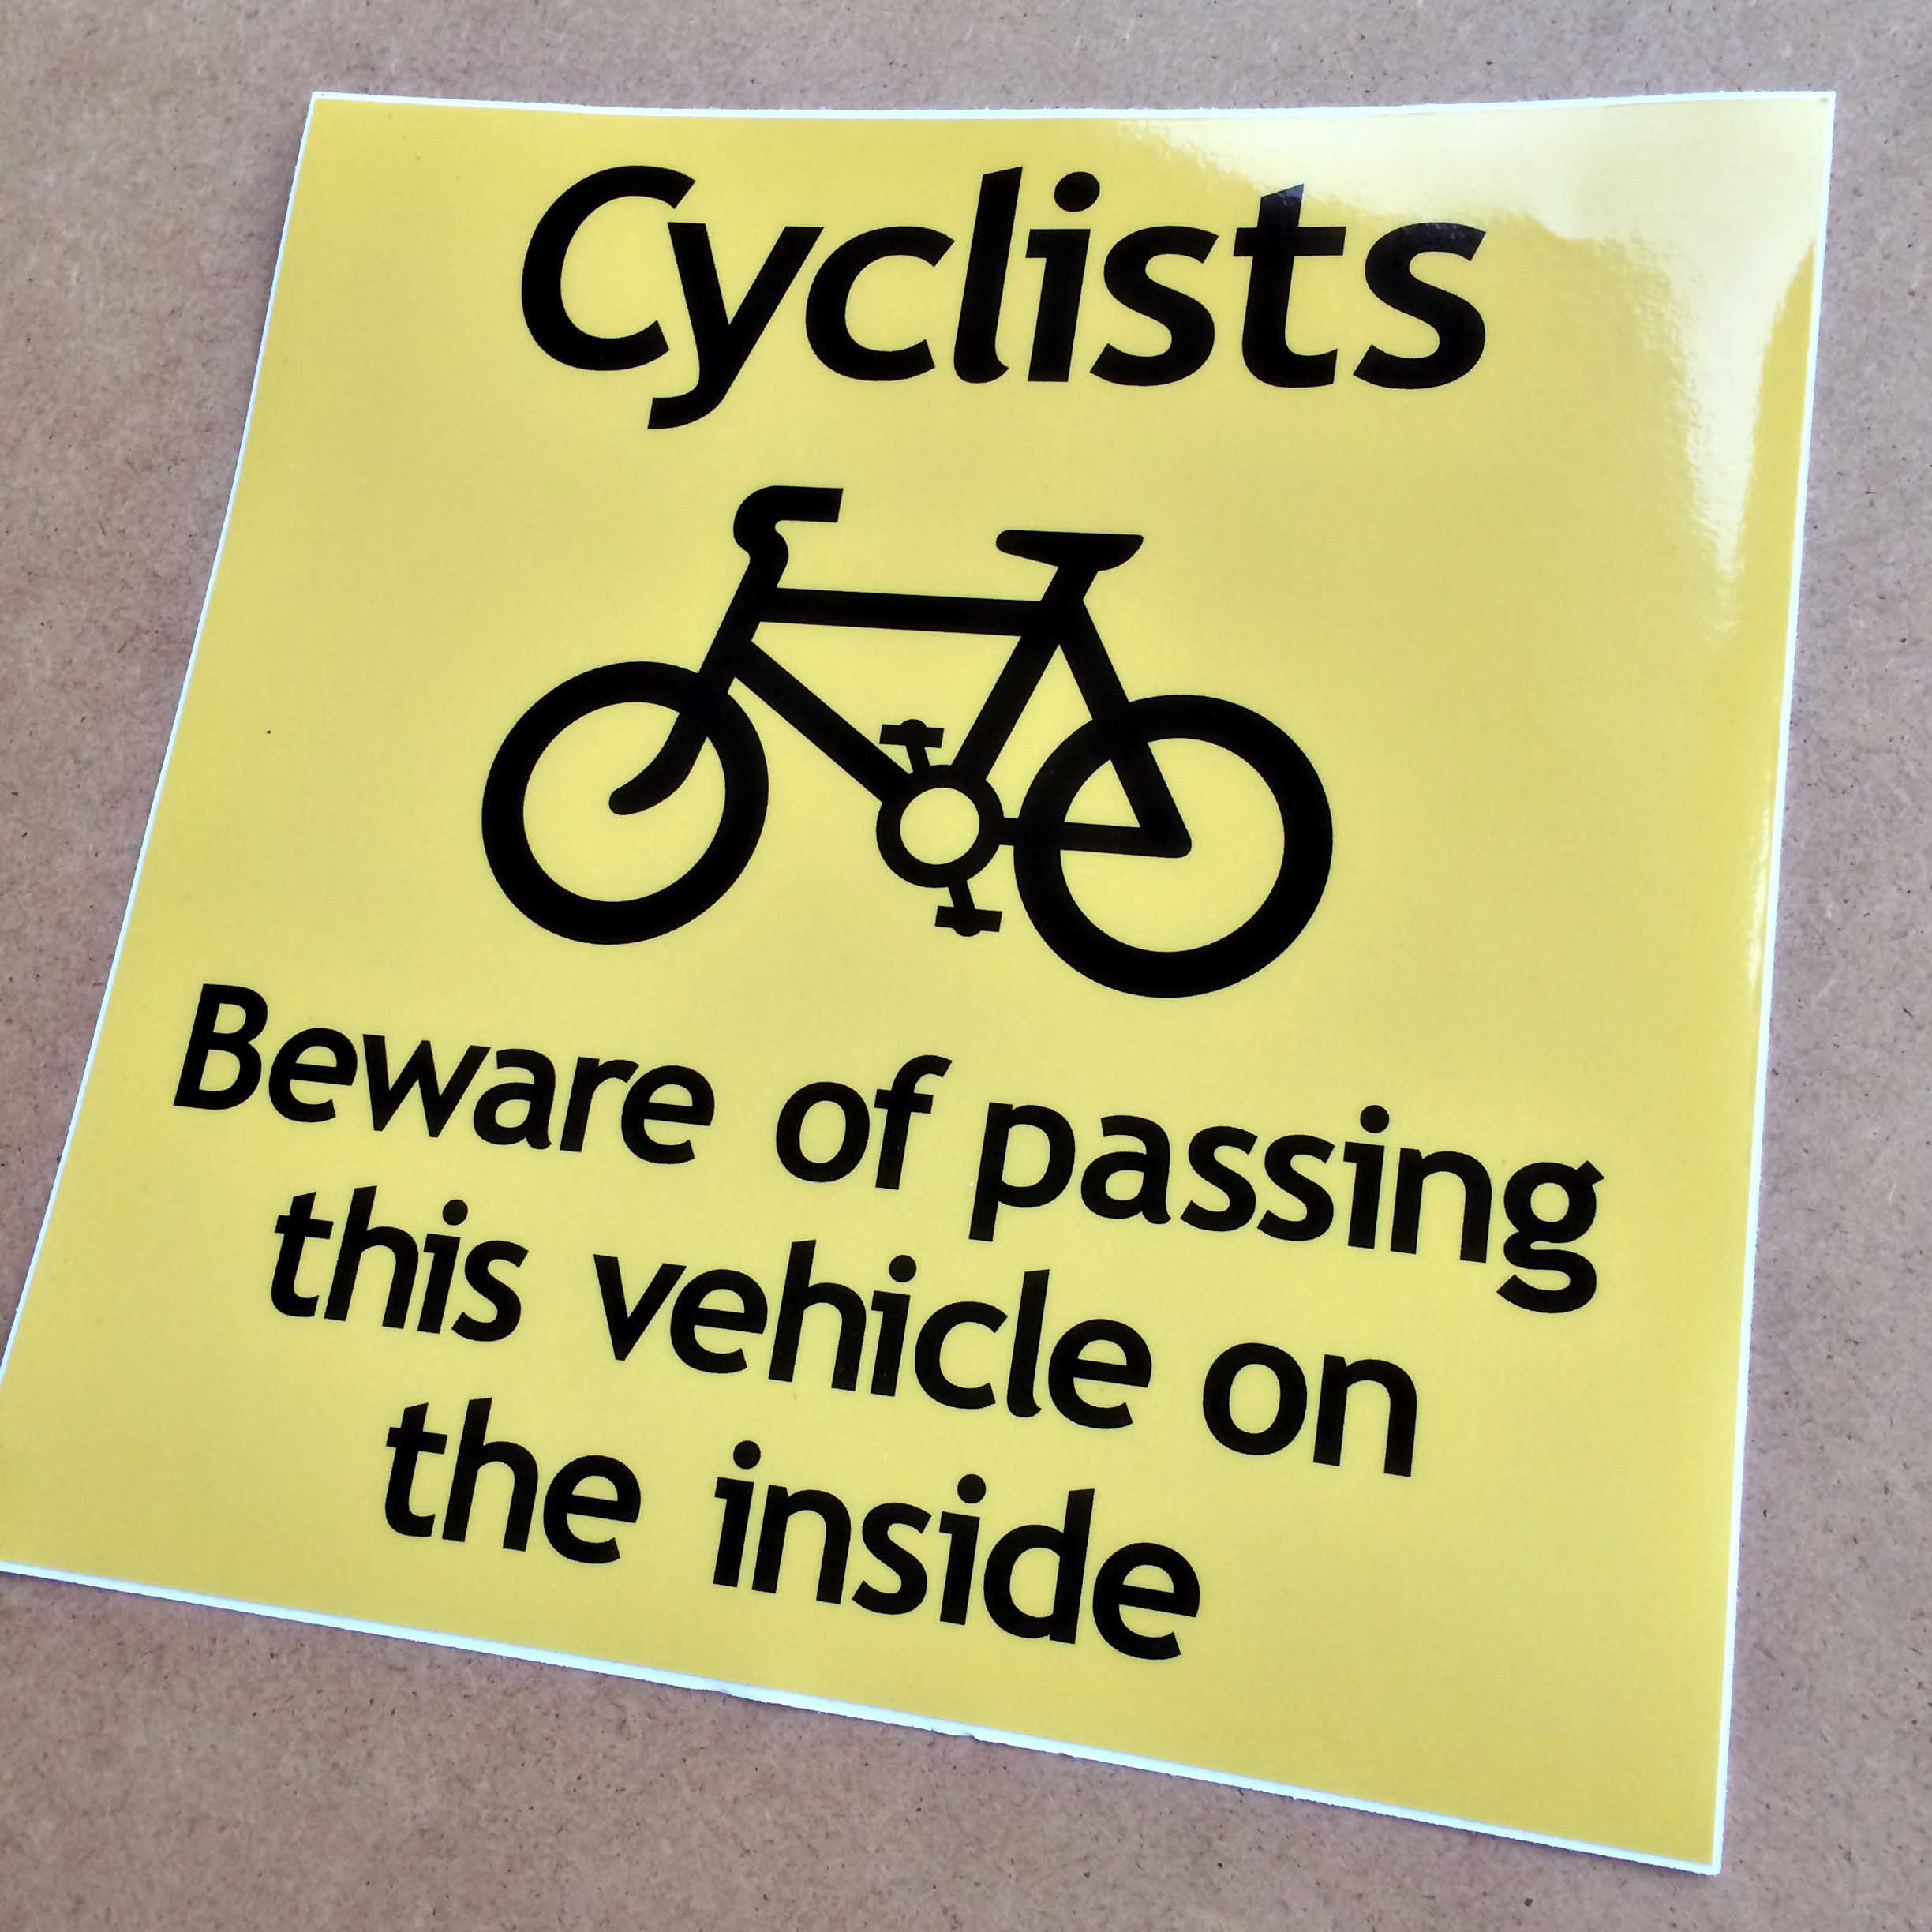 CYCLISTS BEWARE OF PASSING THIS VEHICLE LAMINATED STICKER. Cyclists Beware of passing this vehicle on the inside in black lowercase lettering and a bicycle on a yellow background.